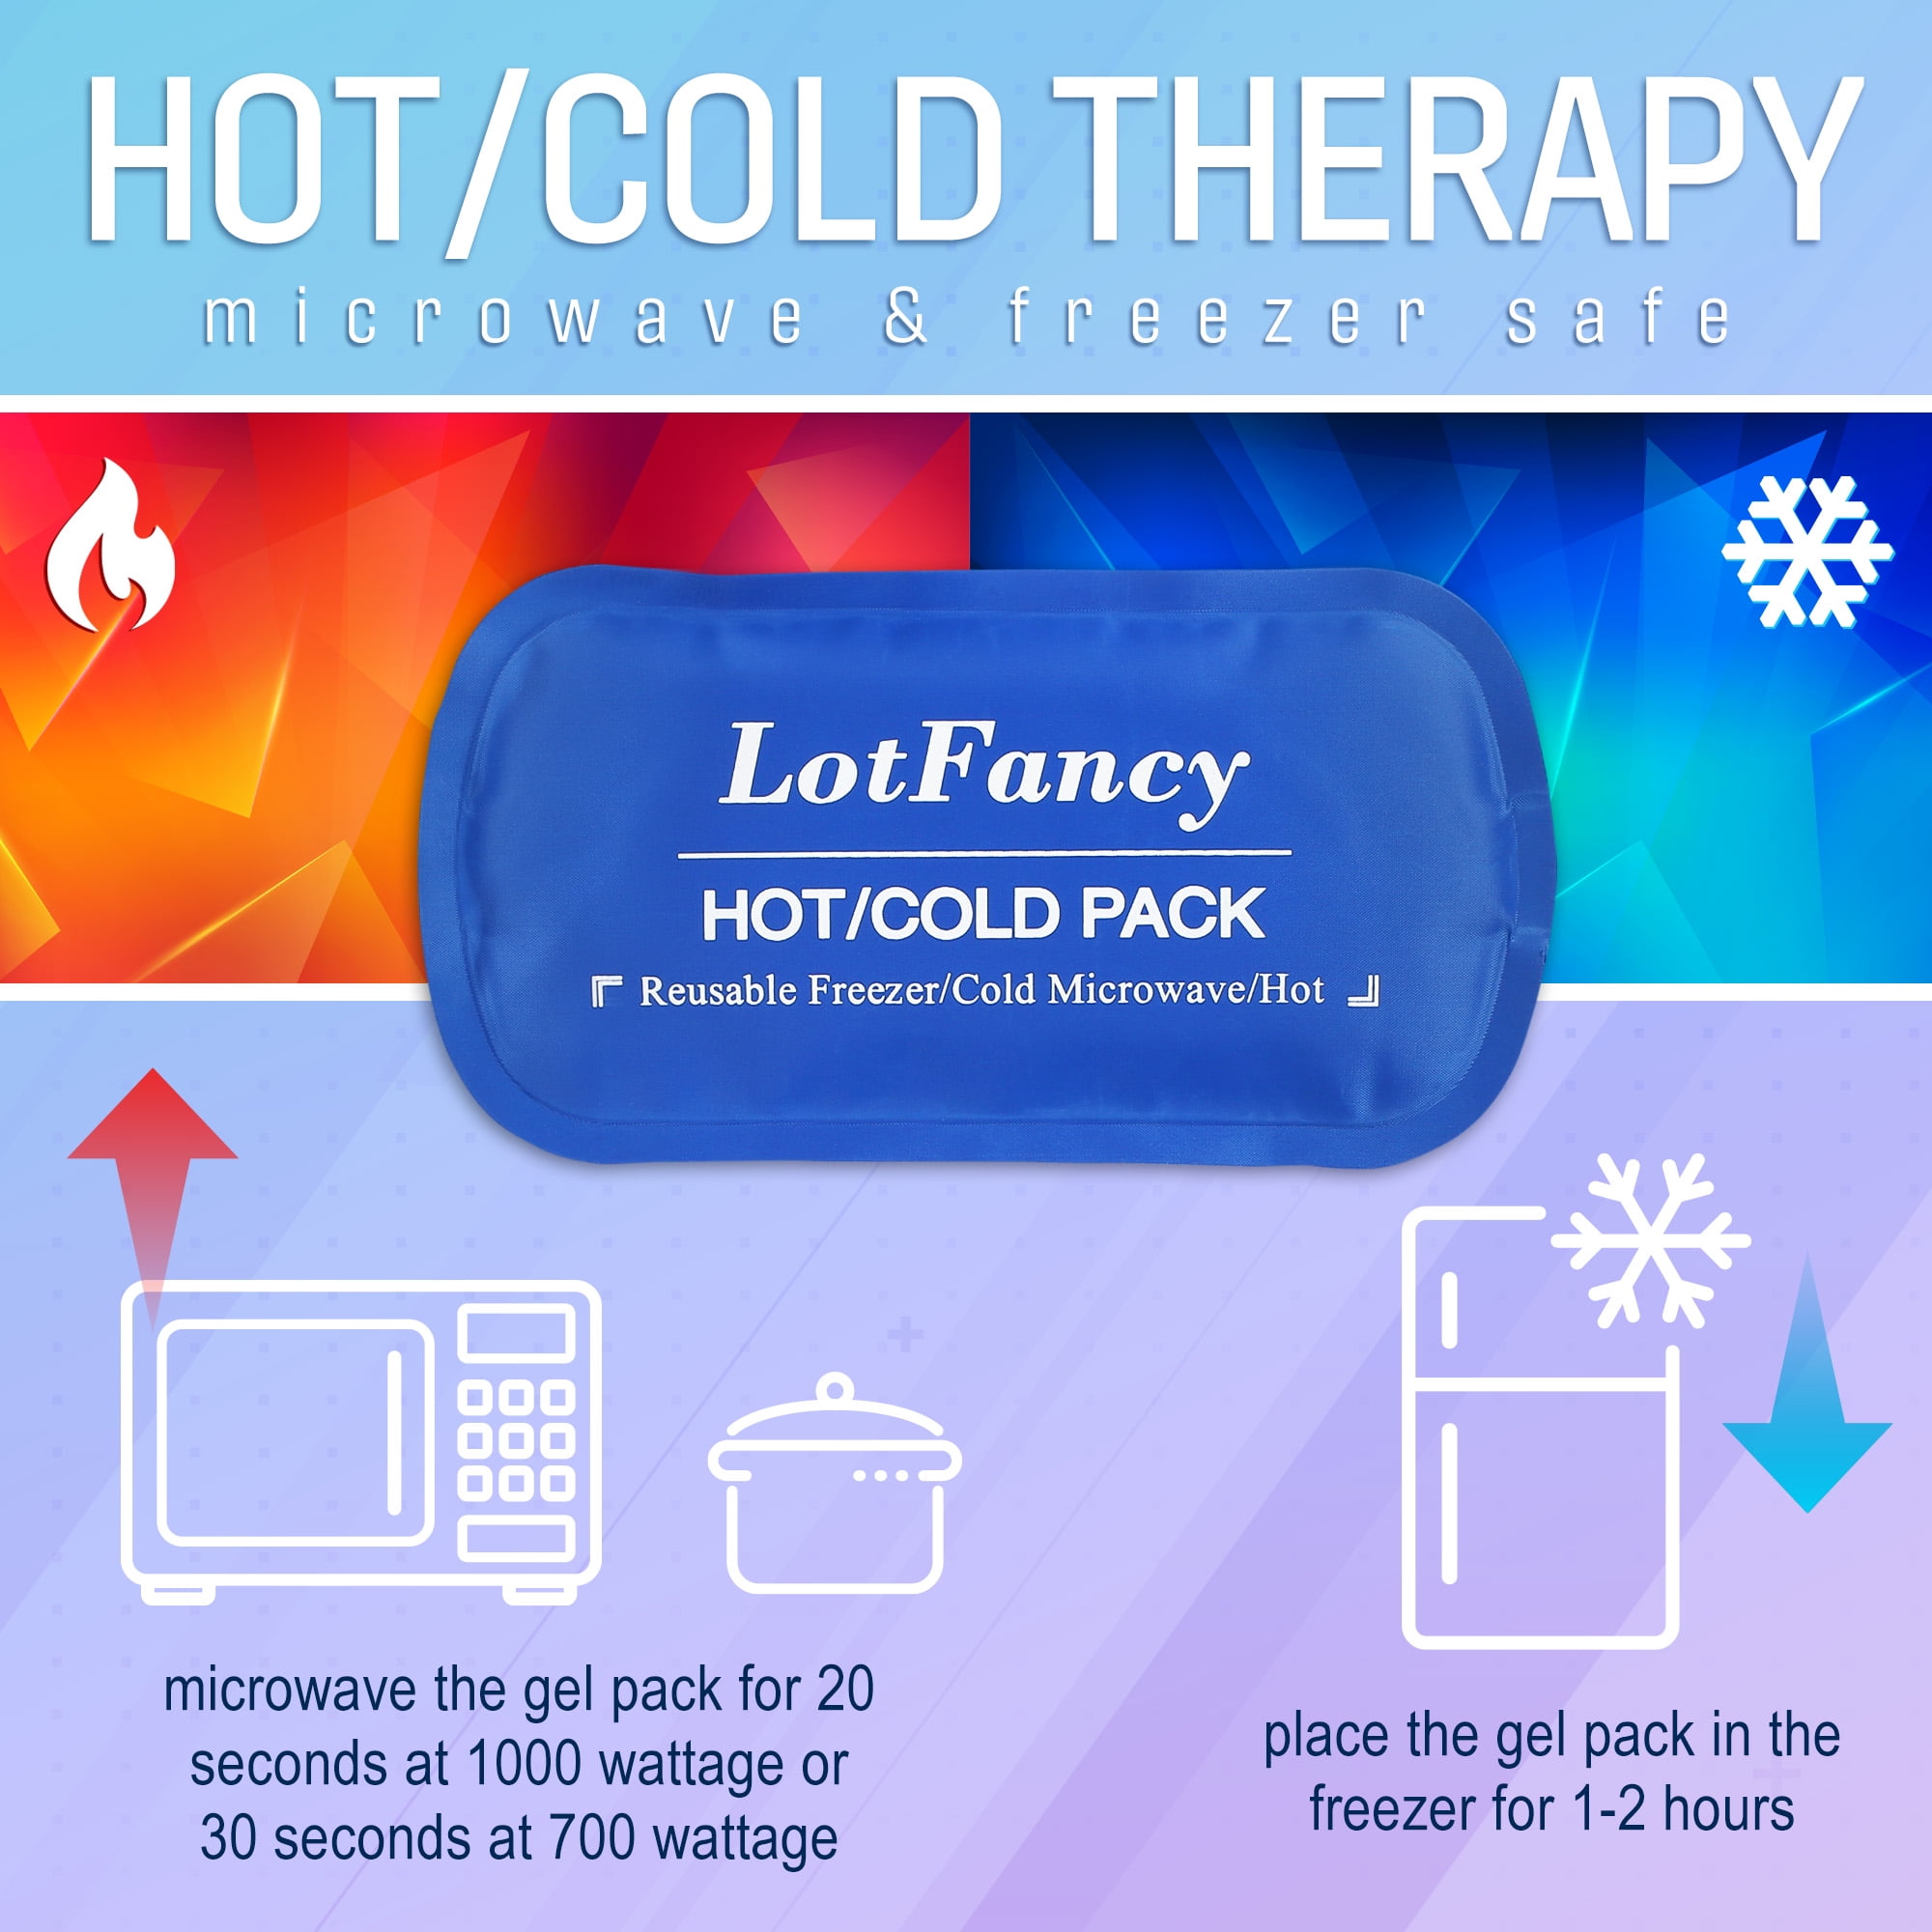 Lotfancy 6 Ice Packs for Cooler and Lunch Box, Reusable Freezer Packs, Size: 7 x 4.75 x 0.75, Blue